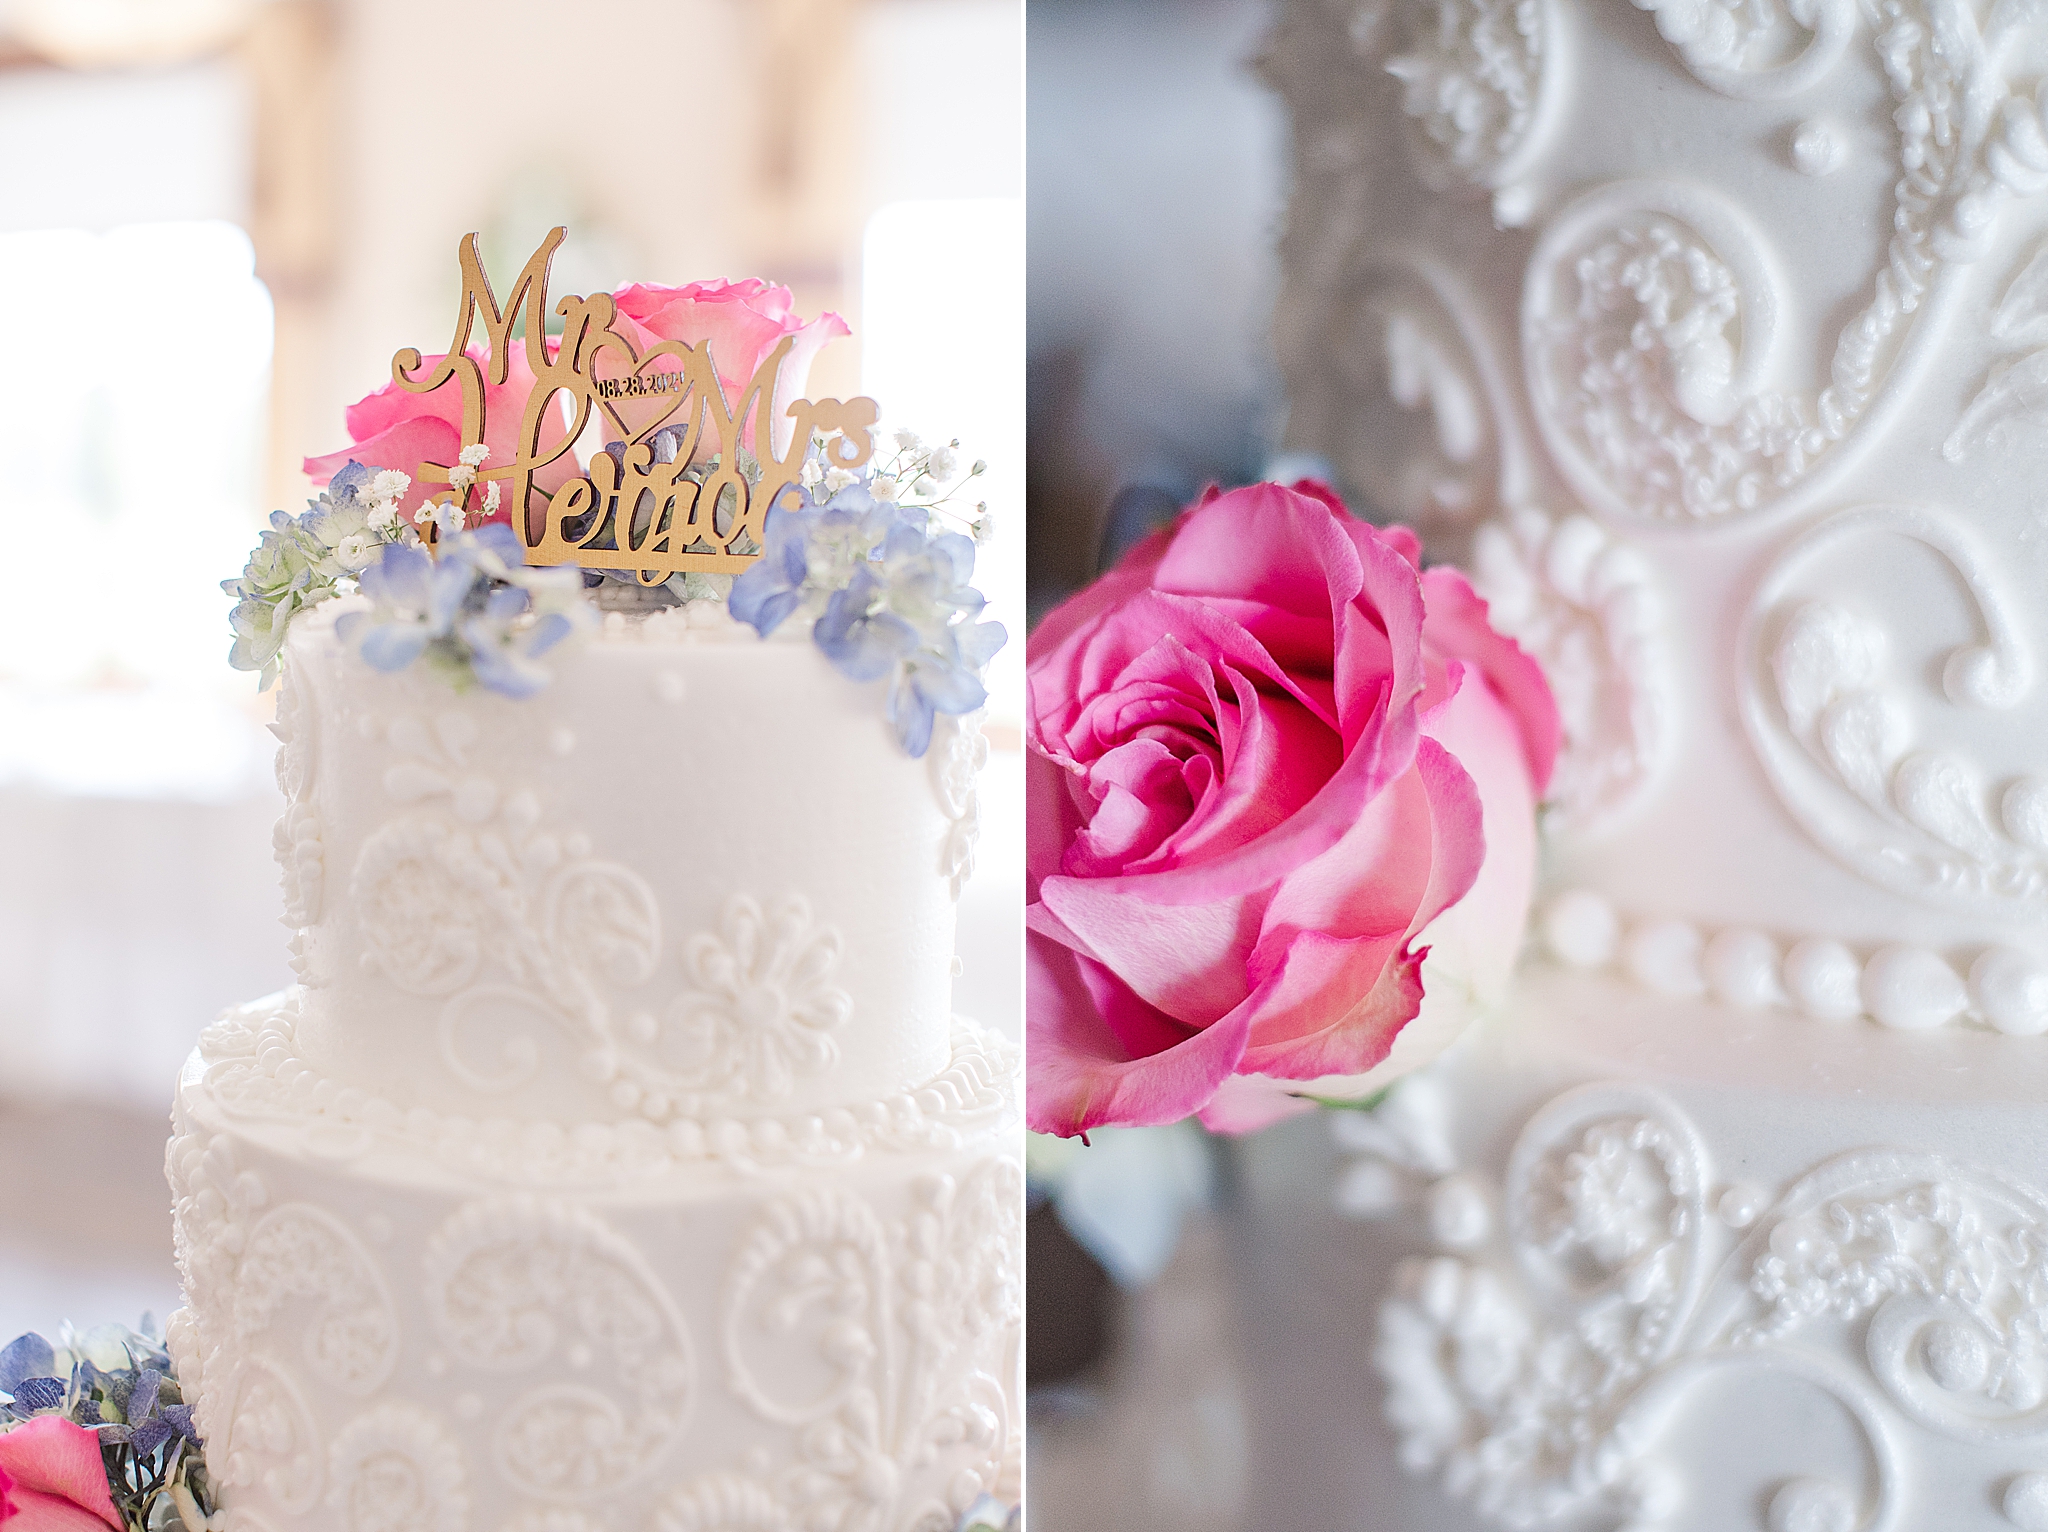 details on wedding cake at Old Hickory Golf Club